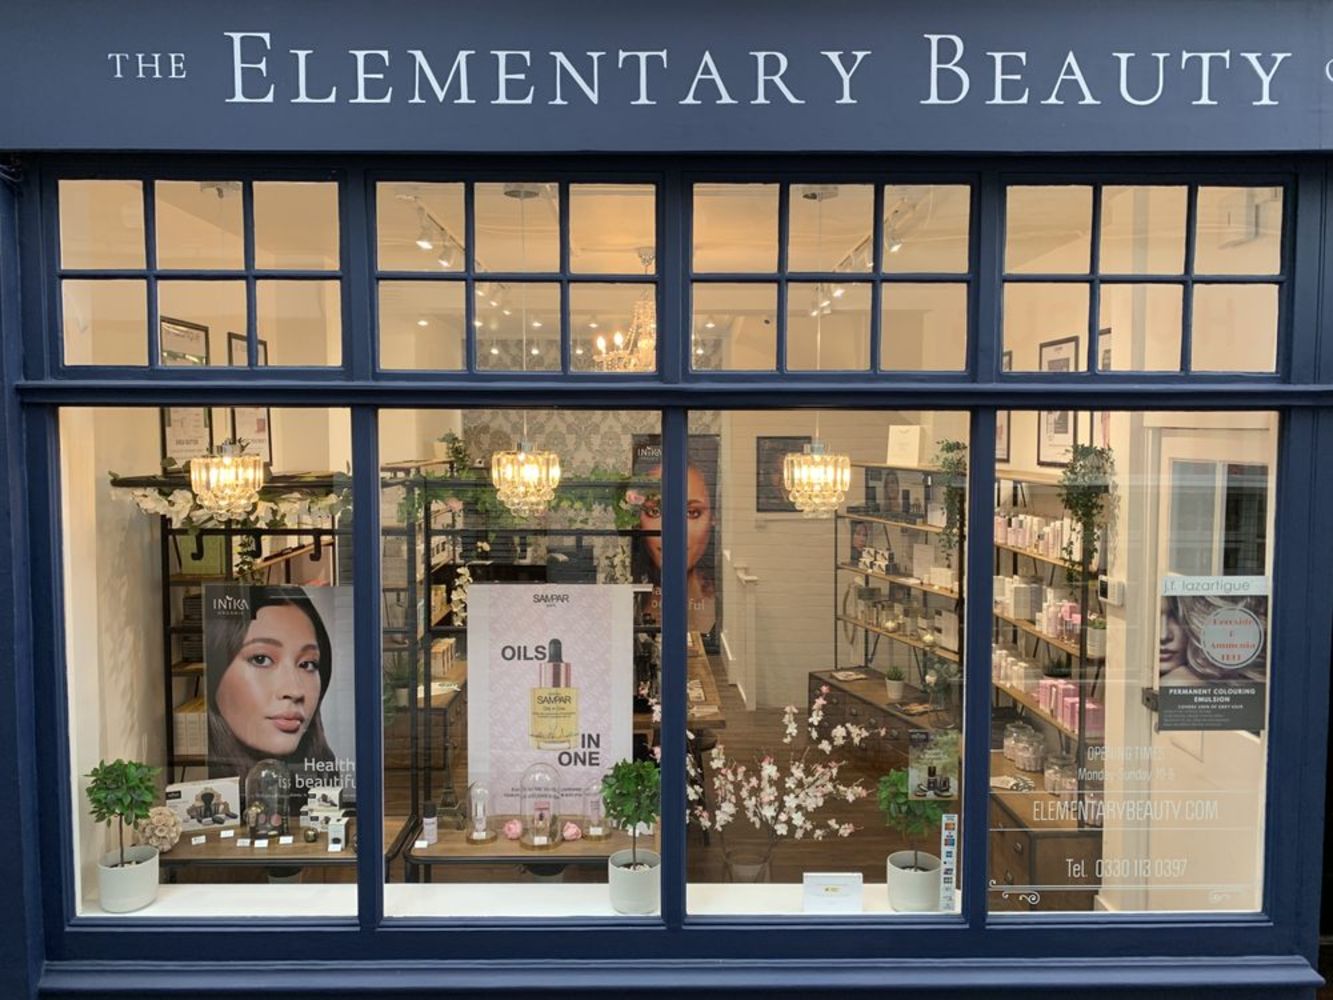 BUSINESS OPPORTUNITY - Website & Stock of 'The Elementary Beauty Company' | Niche Brands | Haircare, Skincare, Make-Up - Approx £30k RRP